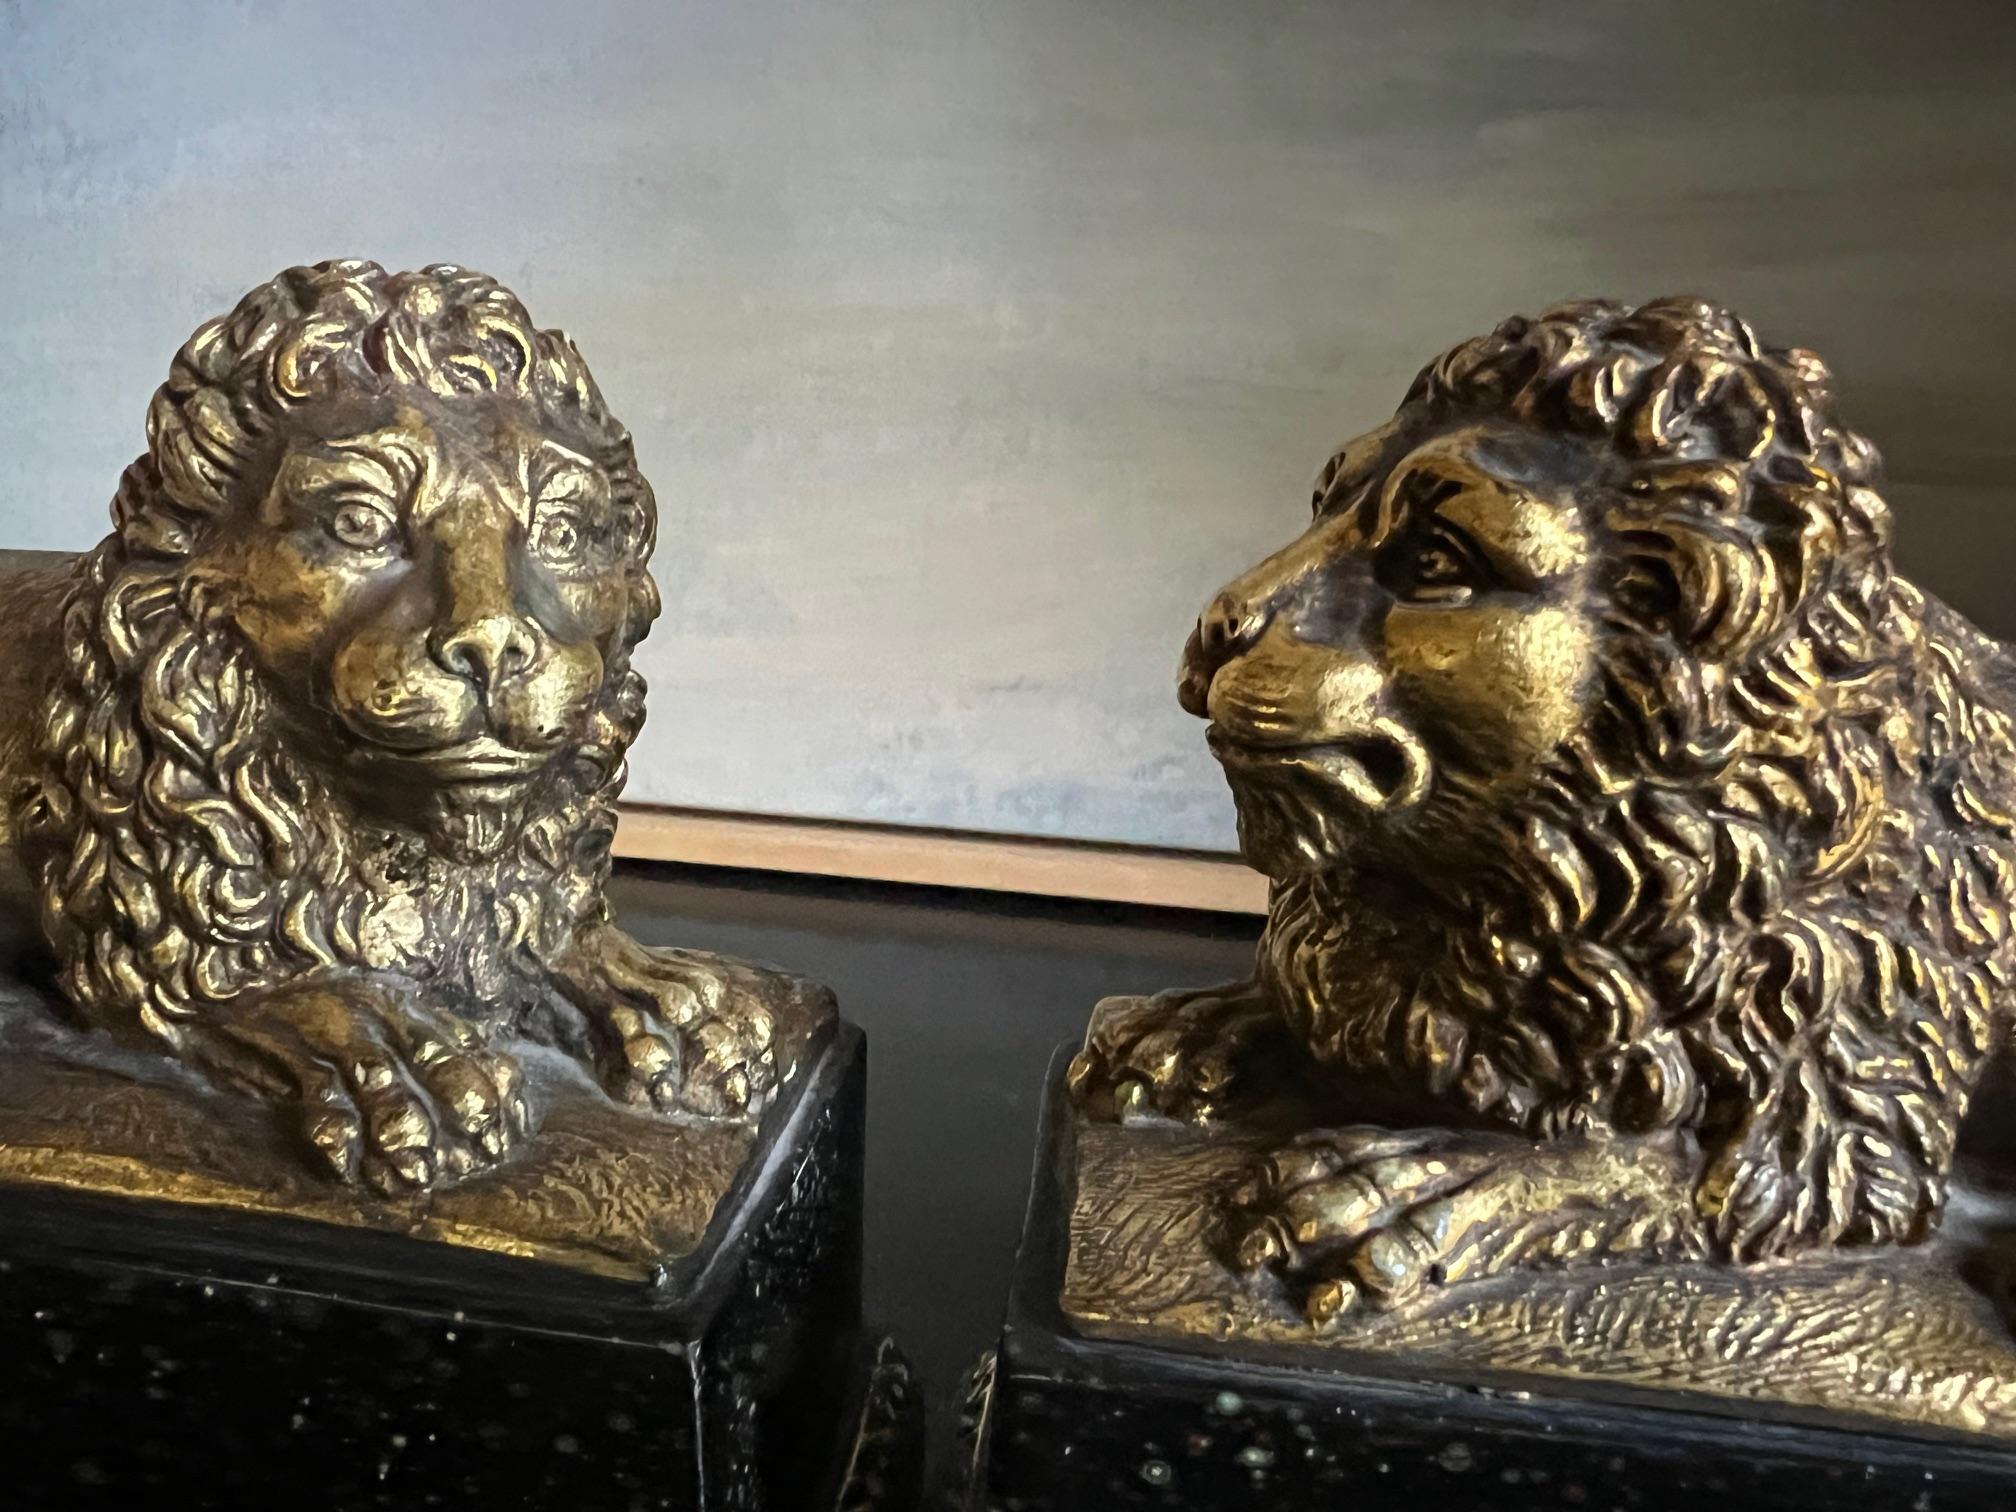 Lion bookends in a gold gilt finish on a faux black marble base by Borghese made in Italy in the 1960's. Made of cast plaster with a built in metal slide to go under the books.

Width of pedestal 3 inches, width of pedestal and metal plate 5.75